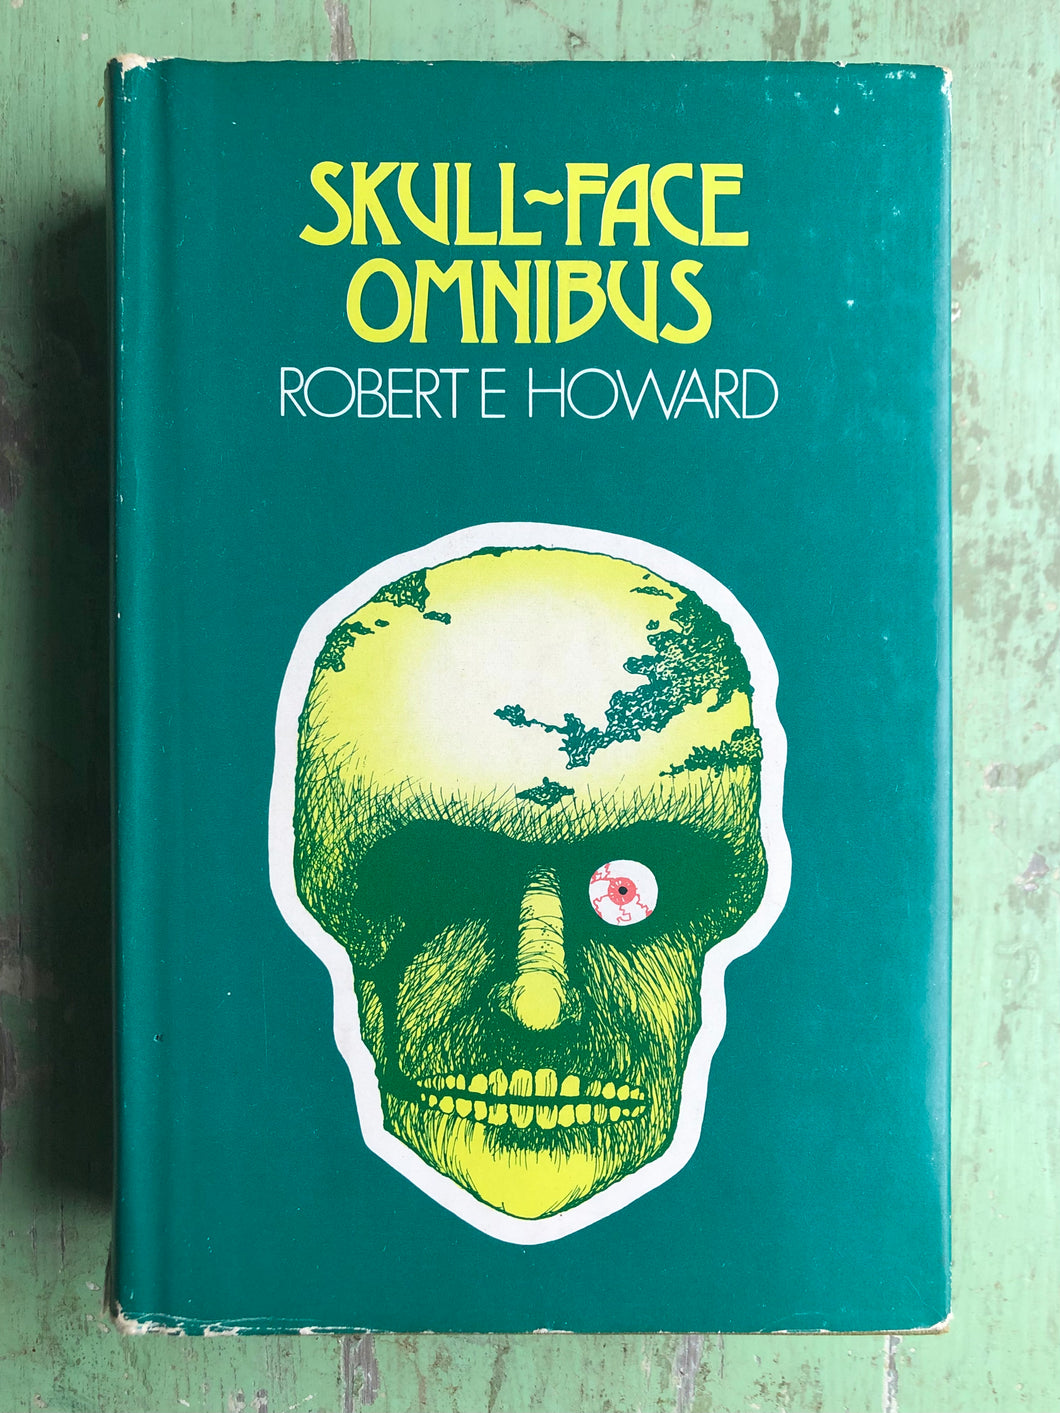 Skull-Face Omnibus and Others by Robert E. Howard